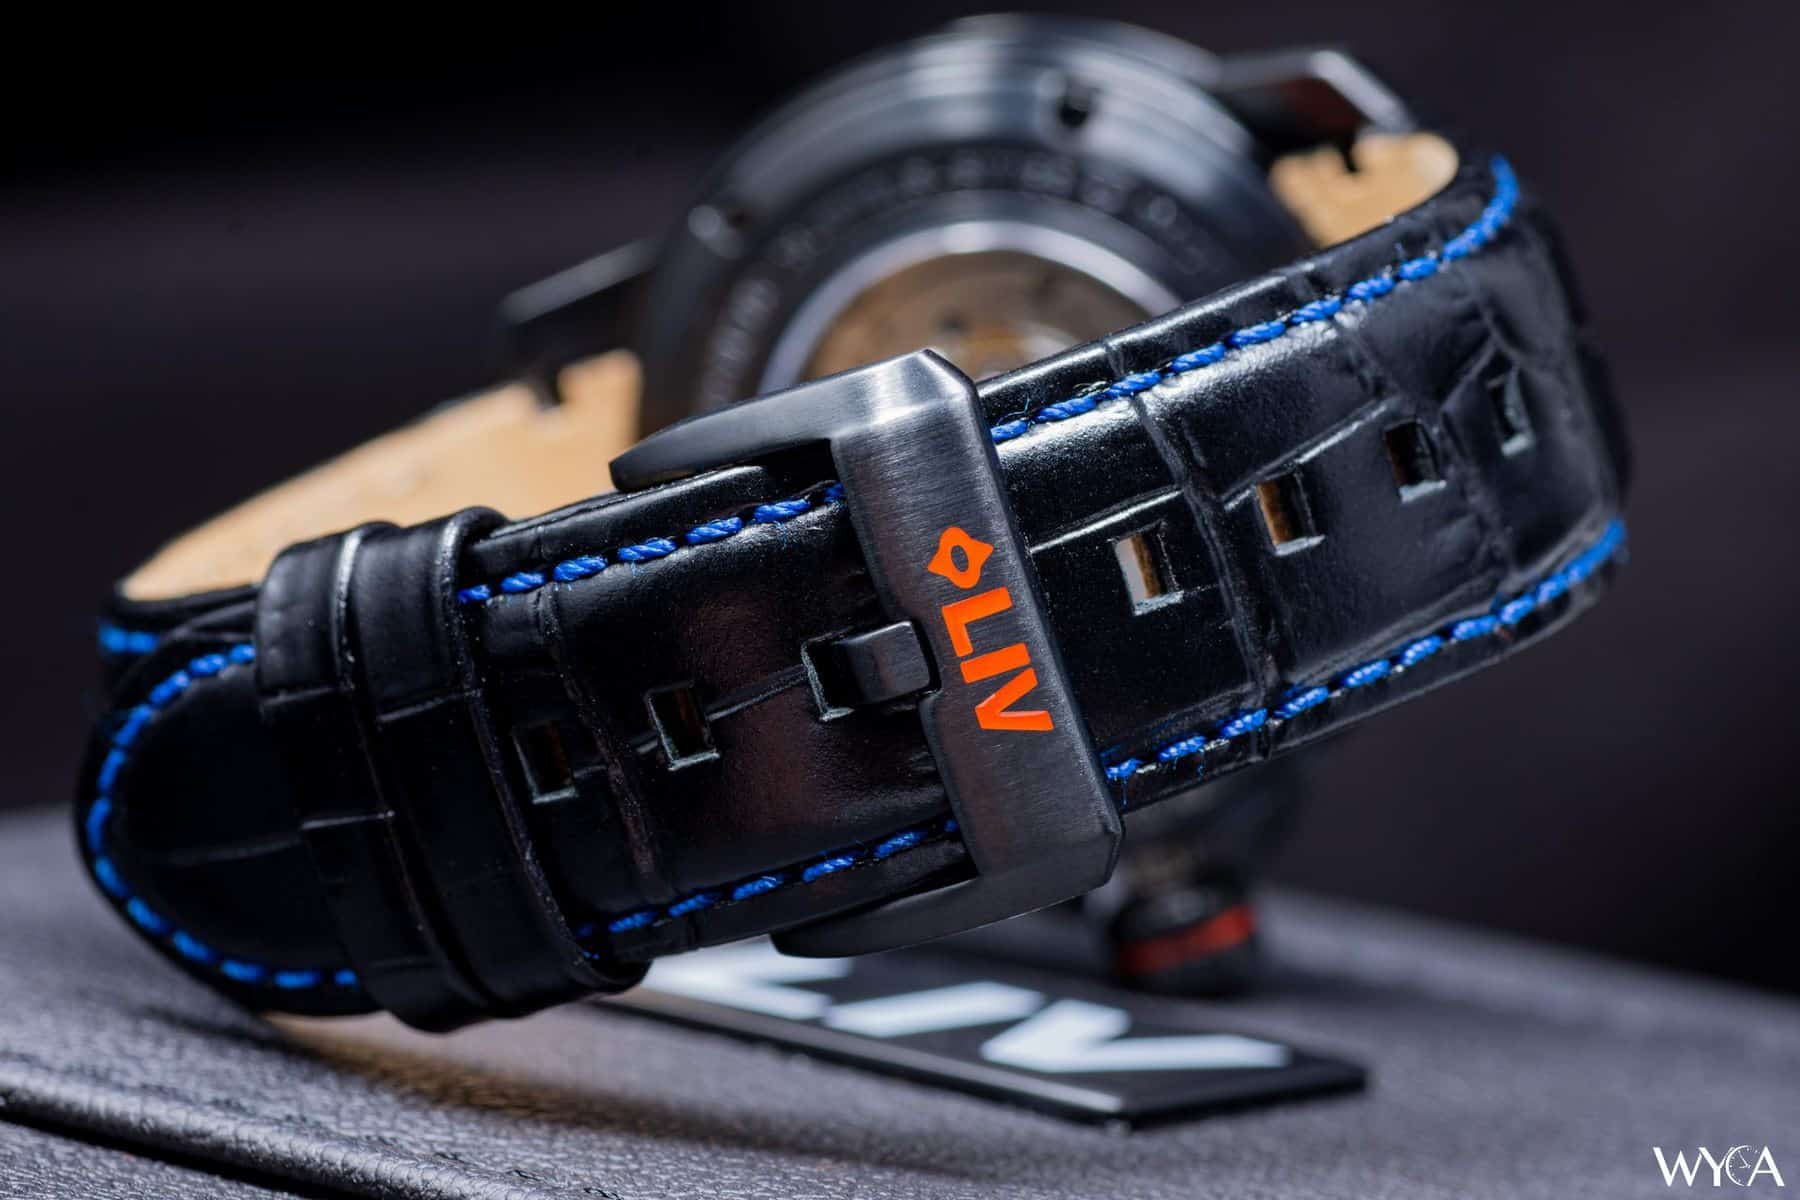 The black and blue-accented crocodile grain leather strap on the LIV GX1-A